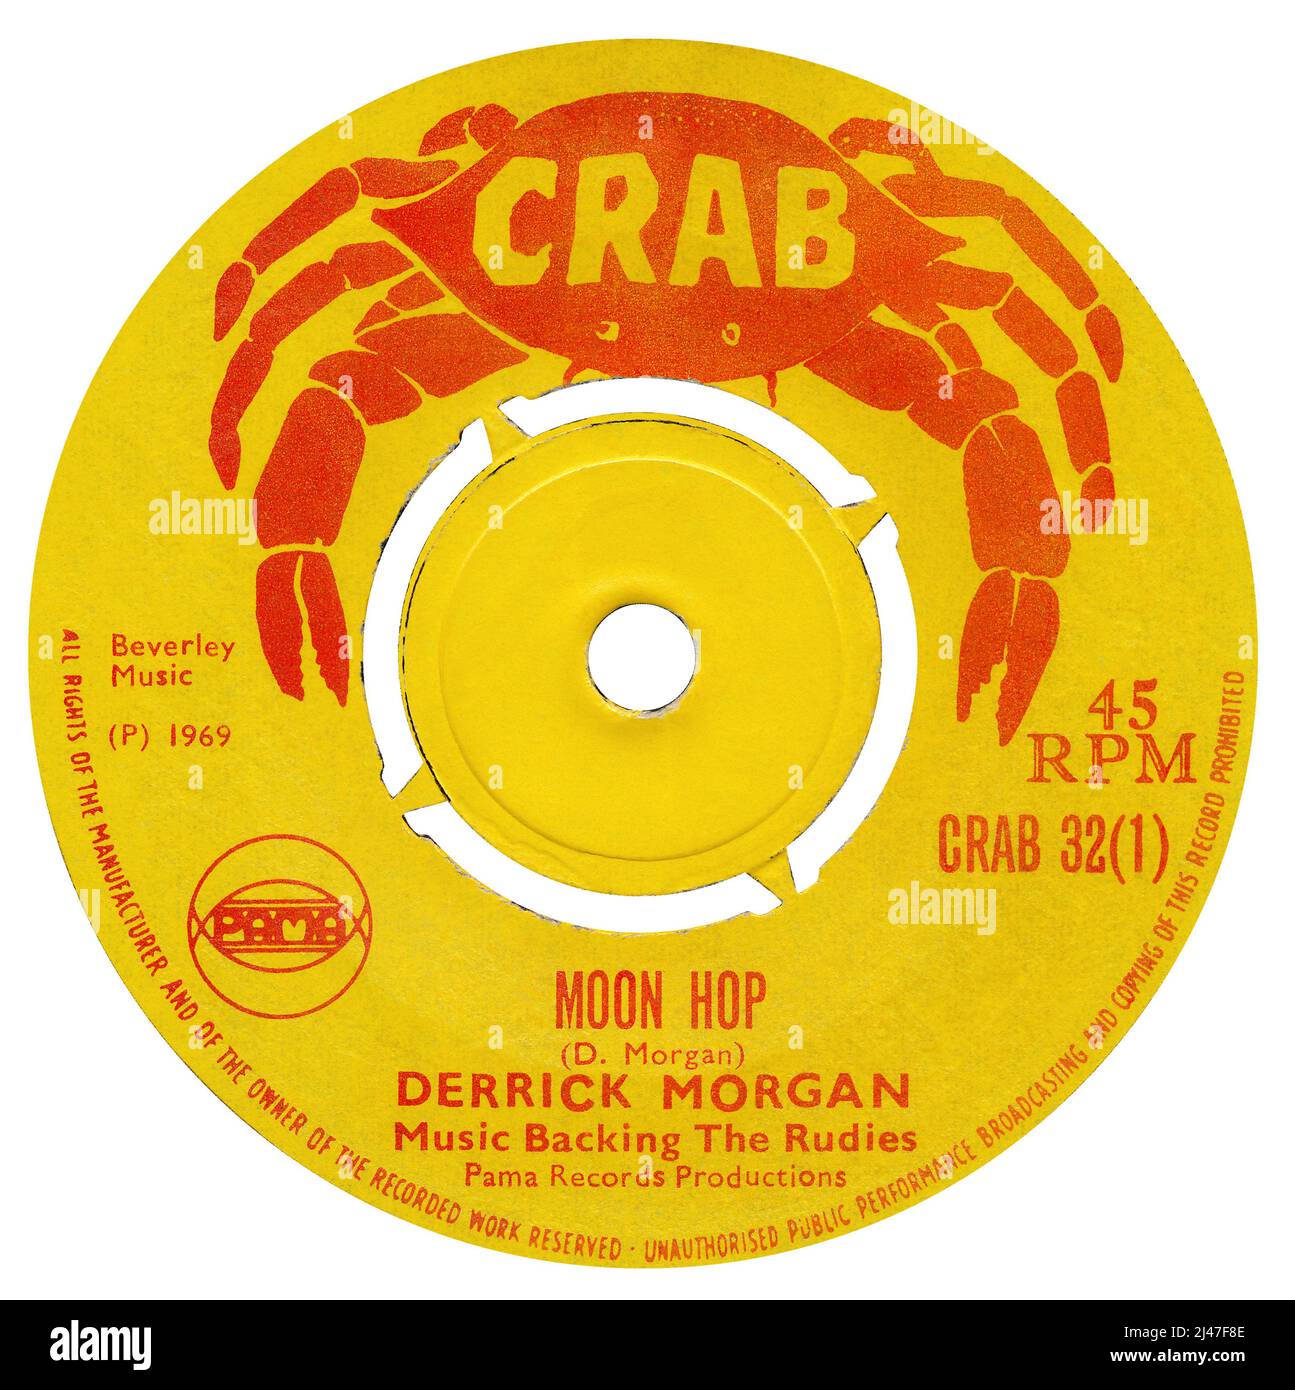 45 RPM 7' UK reggae record label of Moon Hop by Derrick Morgan. Written by Derrick Morgan. Released in October 1969 on the Pama label. Stock Photo